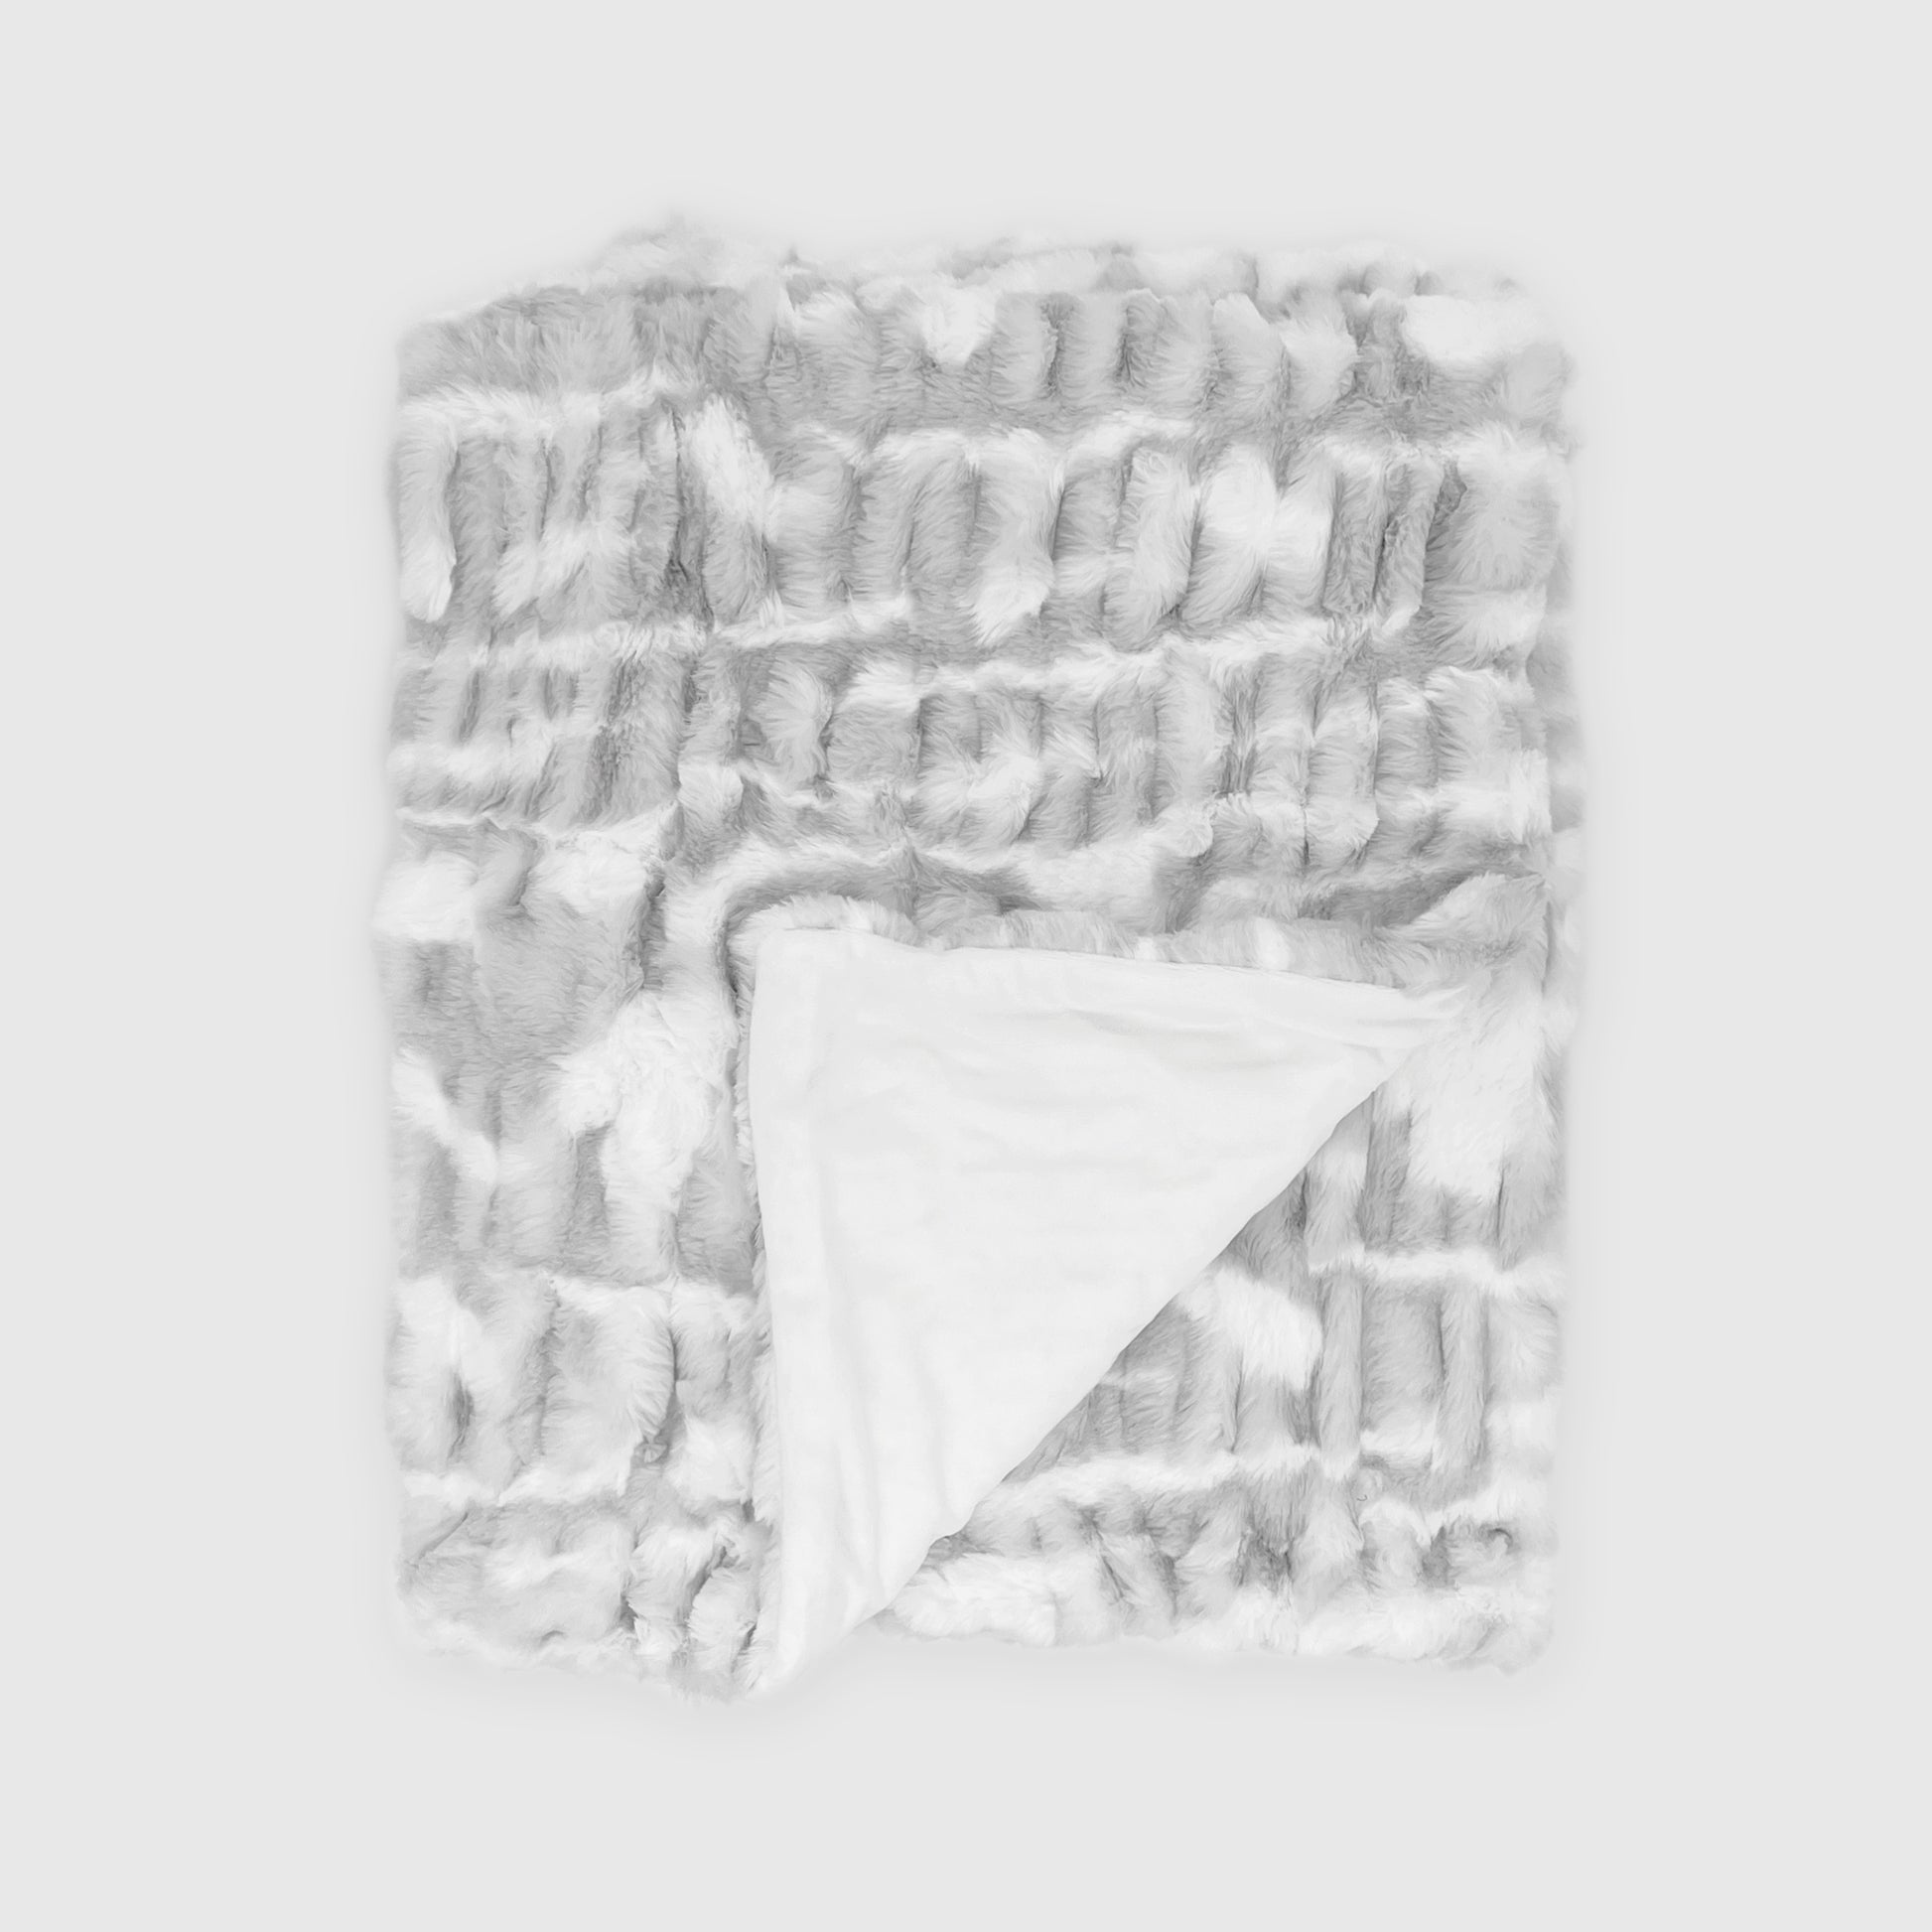  The Mood Mallow Faux Fur Throw, 50x60 in., Gray/White